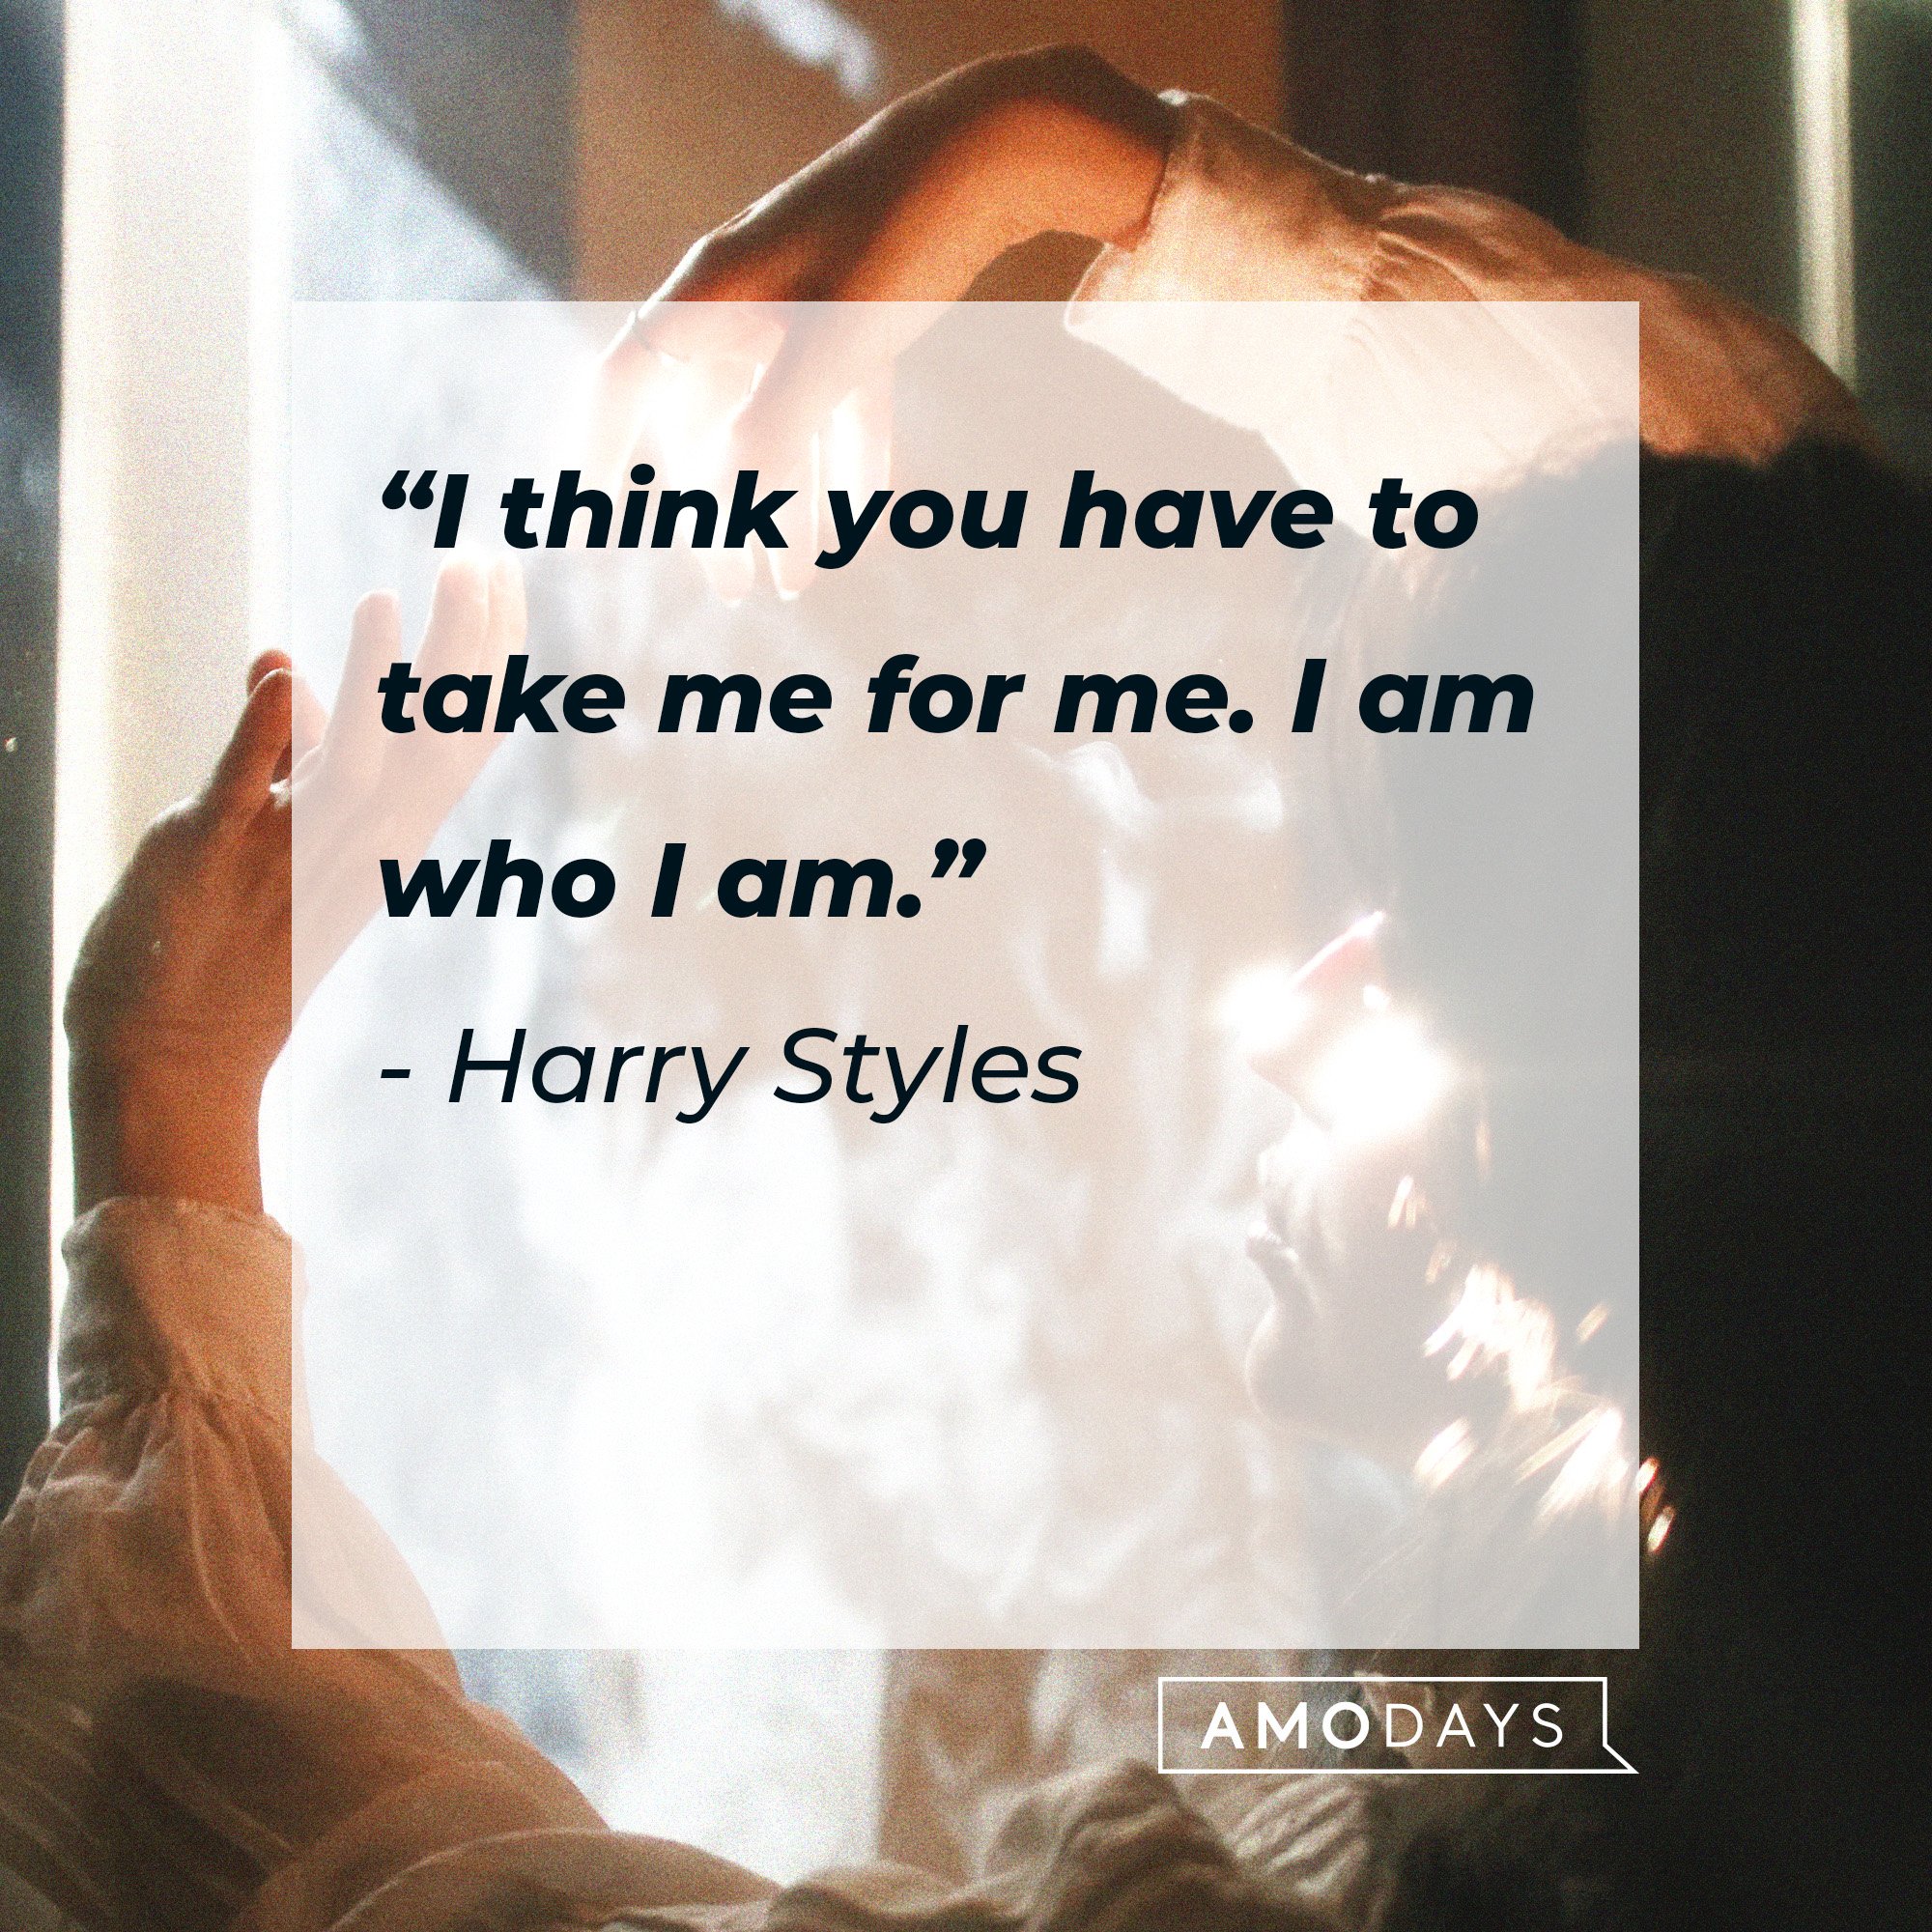 Harry Styles’ quote: "I think you have to take me for me. I am who I am."  | Source: AmoDays